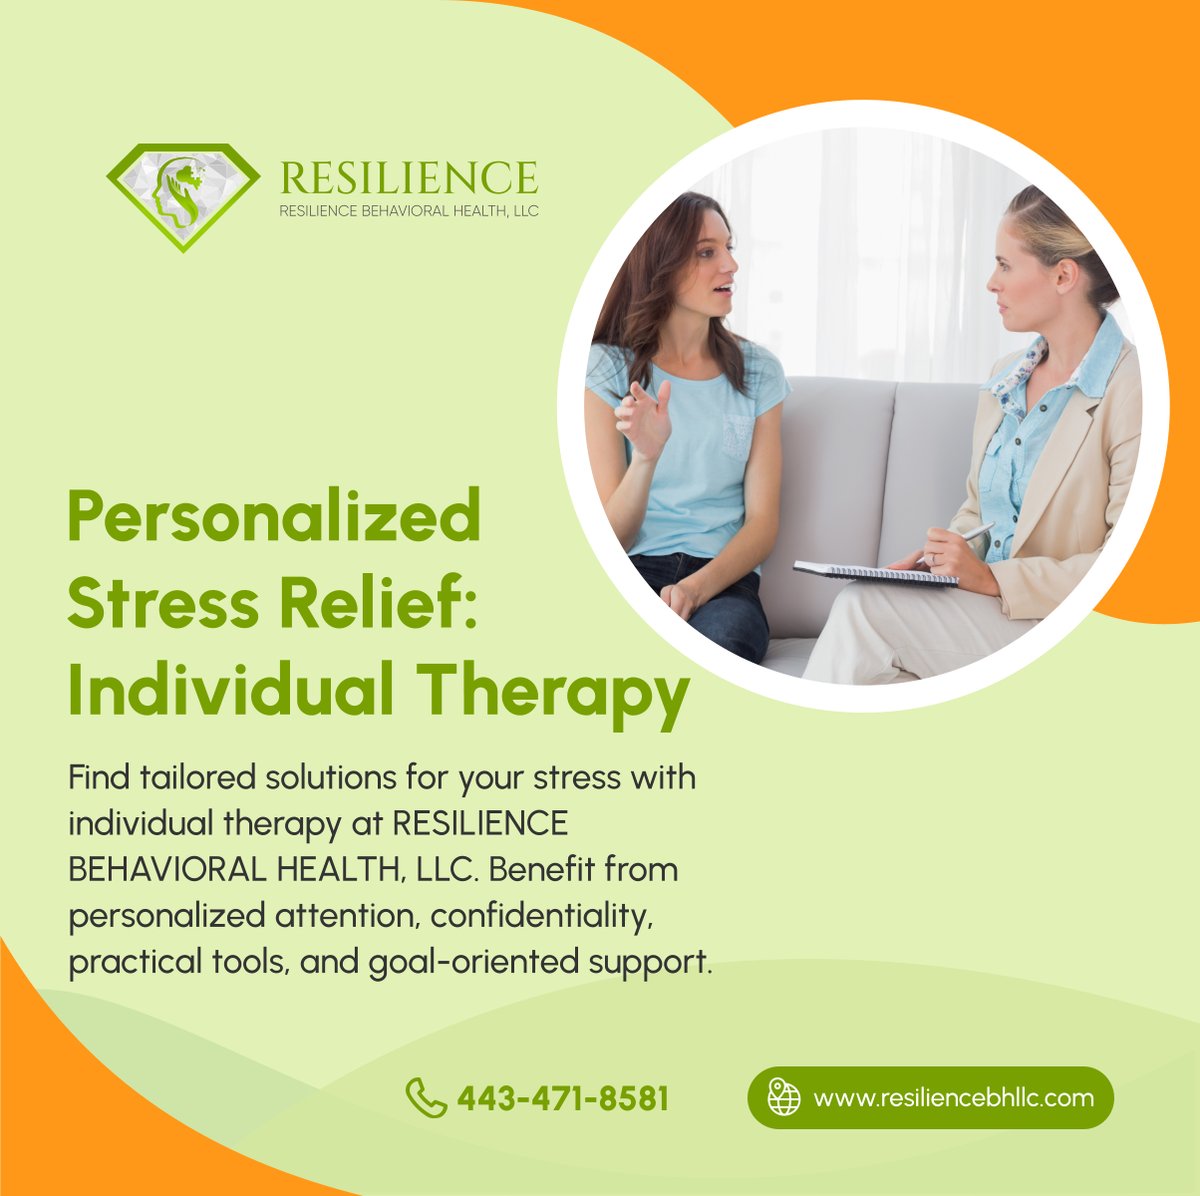 Take charge of your stress management journey with individual therapy at RESILIENCE BEHAVIORAL HEALTH, LLC. Discover personalized strategies for a peaceful life. Visit tinyurl.com/yvvns7rw to learn more. 

#IndividualTherapy #BehavioralHealthCare #PikesvilleMD